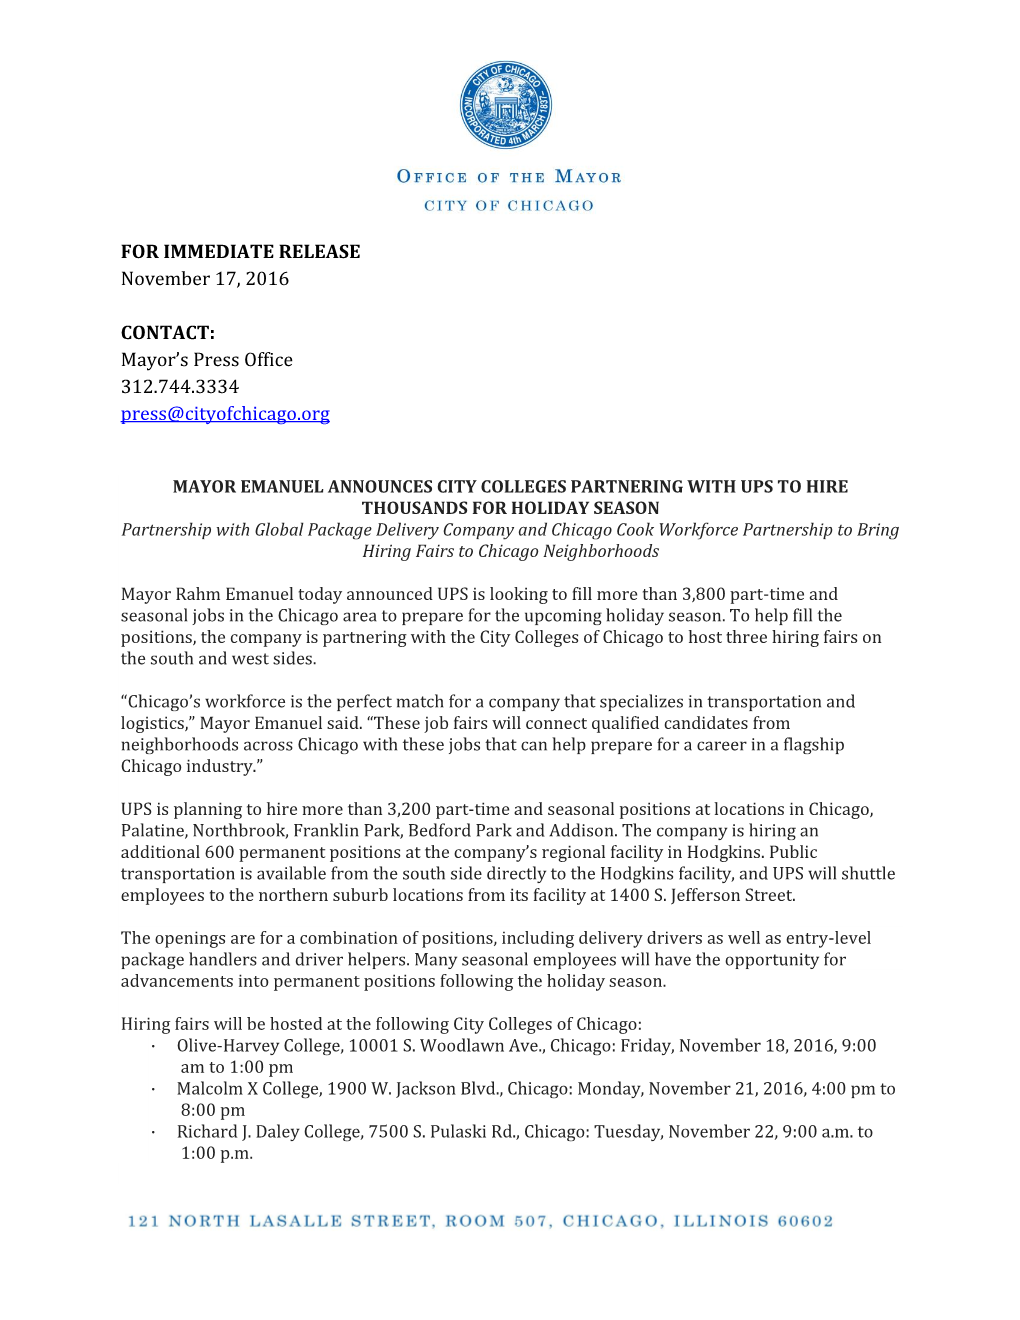 FOR IMMEDIATE RELEASE November 17, 2016 CONTACT: Mayor's Press Office 312.744.3334 Press@Cityofchicago.Org